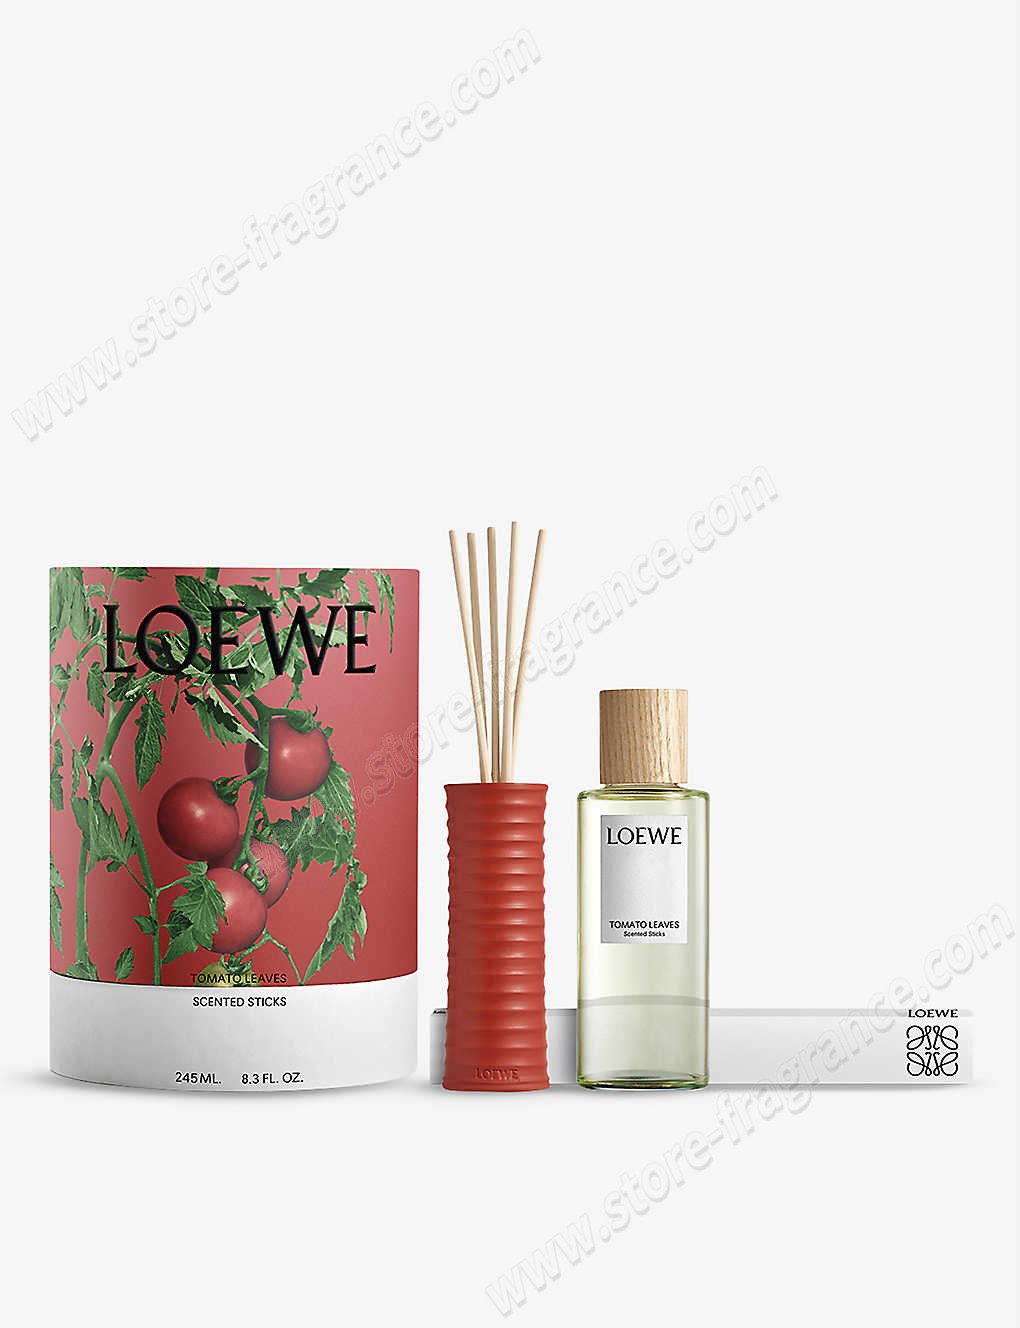 LOEWE/Tomato Leaves room diffuser 245ml ✿ Discount Store - LOEWE/Tomato Leaves room diffuser 245ml ✿ Discount Store